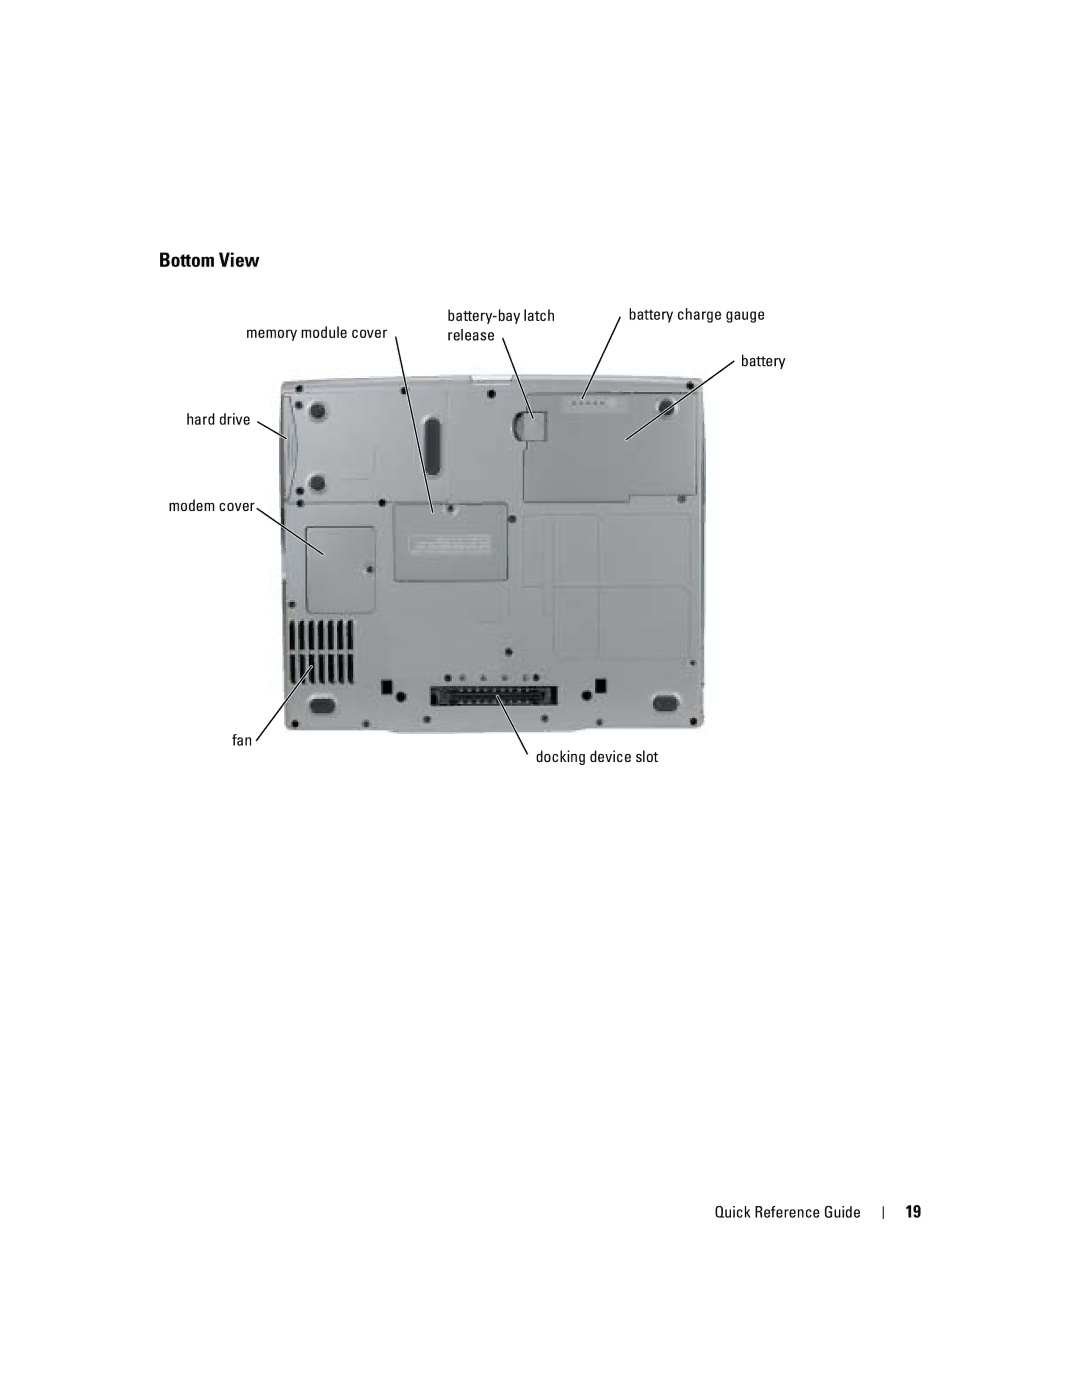 Dell D610 manual Bottom View, Battery-bay latch, Memory module cover 